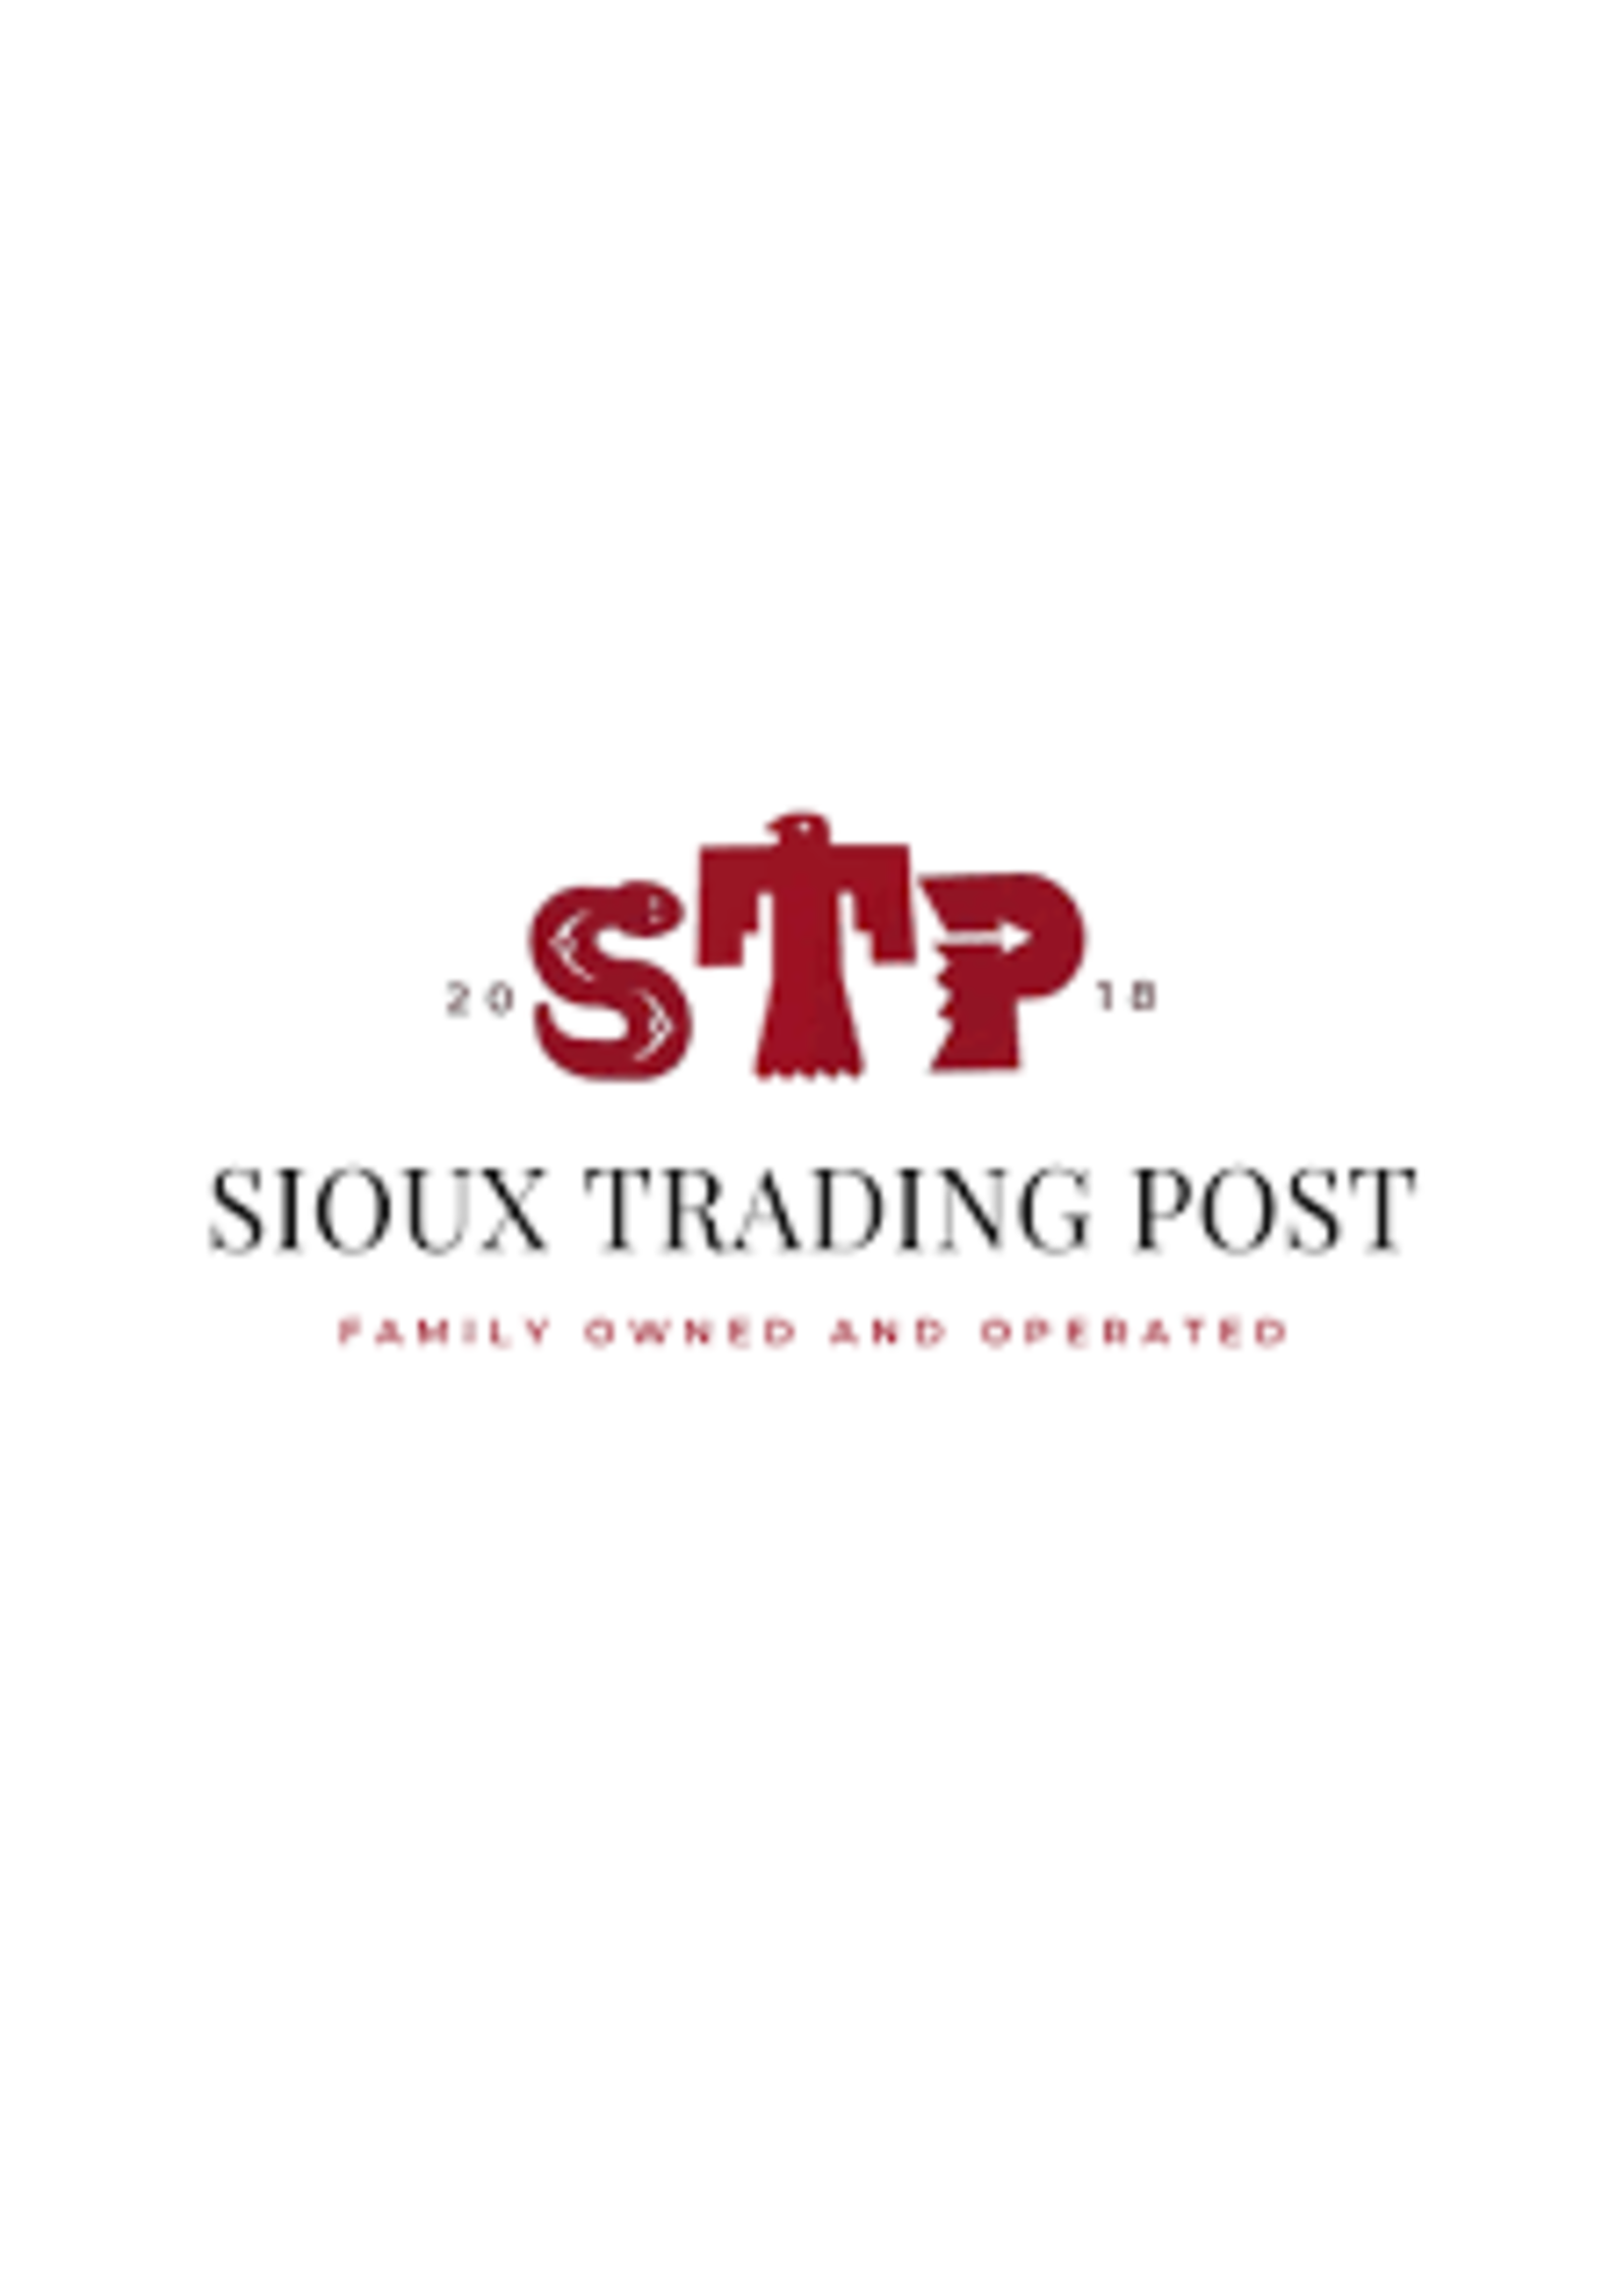 Sioux Trading Post Sioux Trading Post Tea Blends